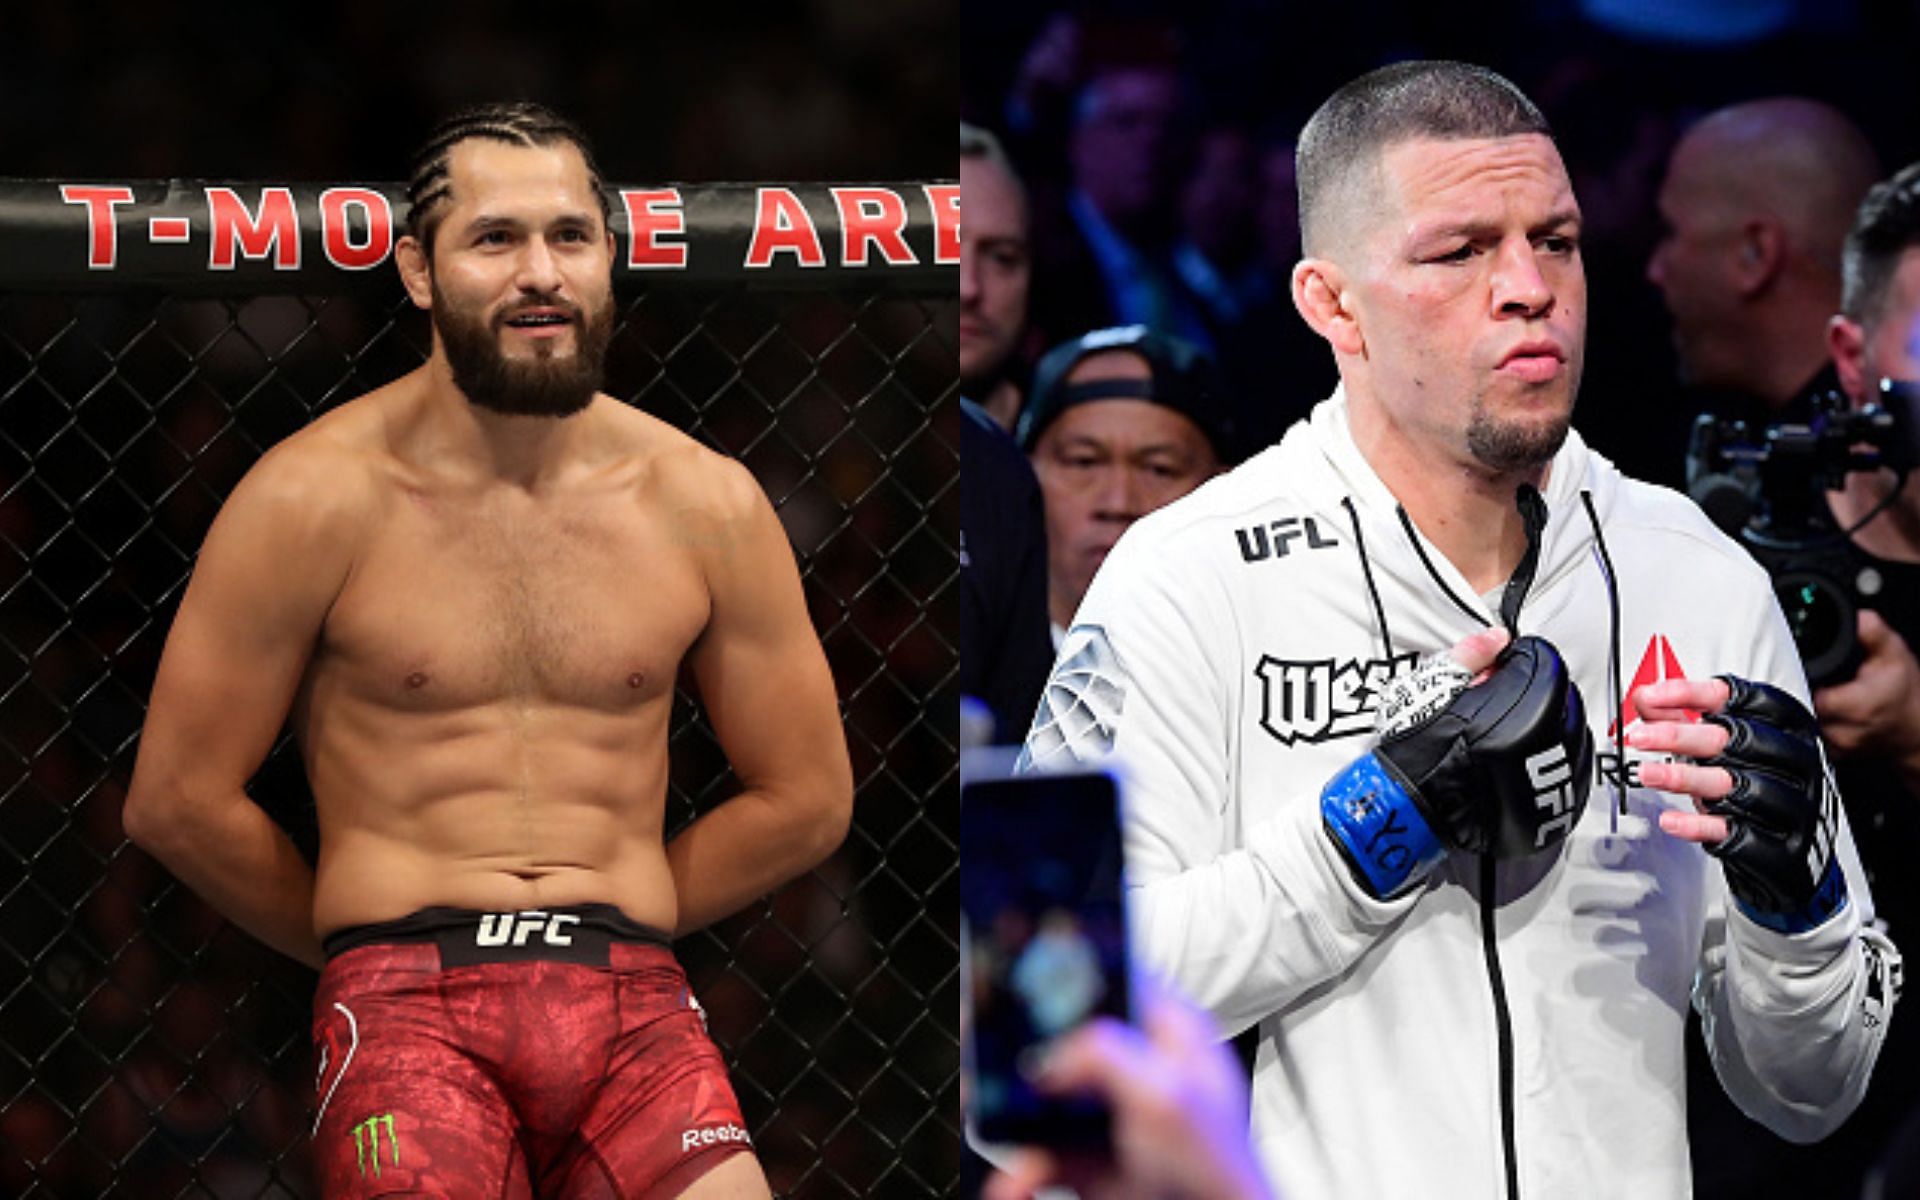 Jorge Masvidal weighs in on Nate Diaz bout